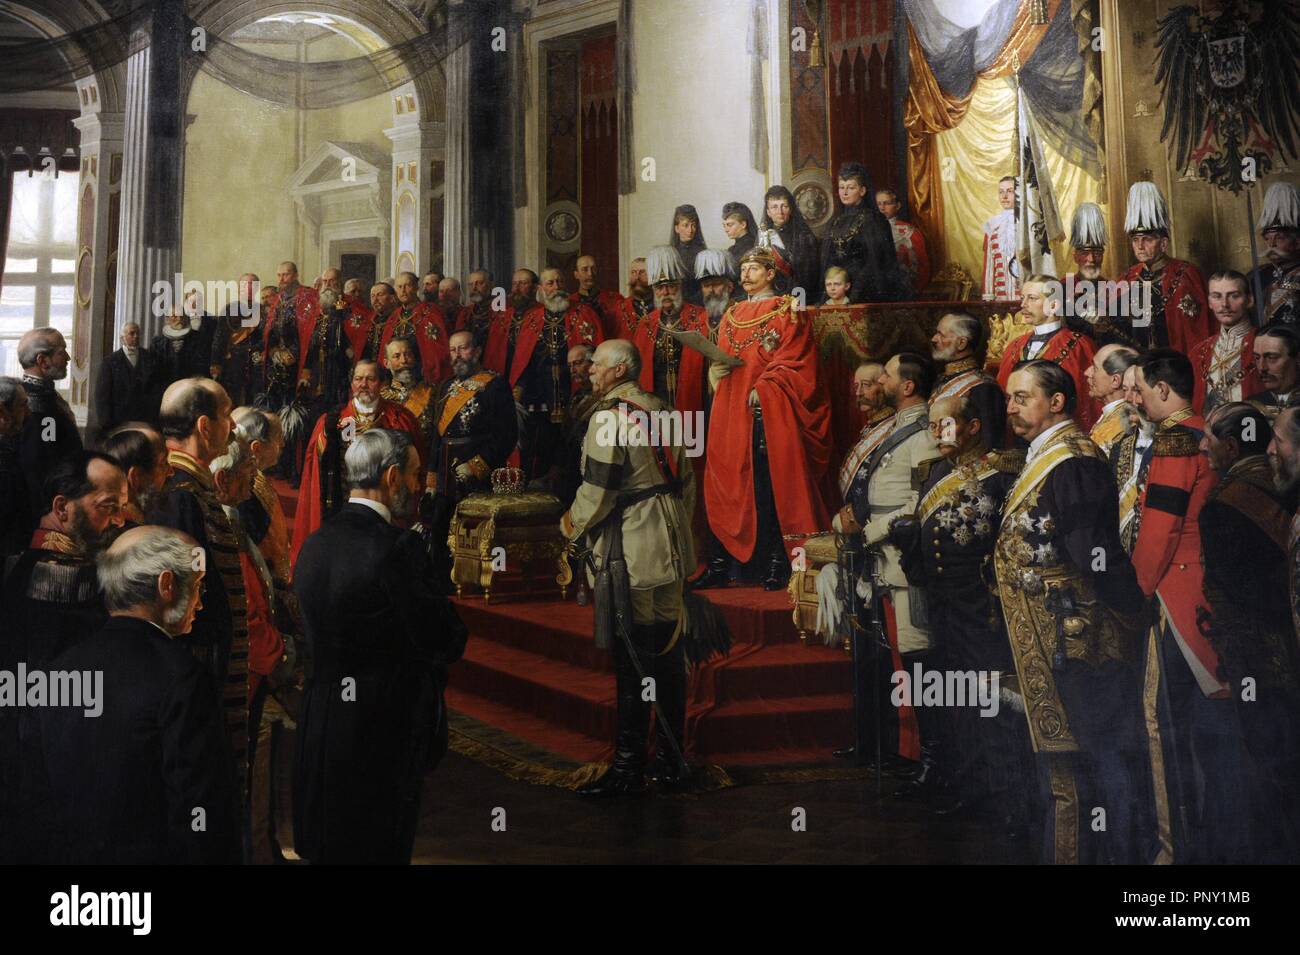 The Opening of the German Reichstag in the White Hall of the Berlin Schloss by Kaiser Wilhelm II on June 25, 1888. Painting finished in 1893 by Anton Von Werner (1843-1915). Detail. German Historical Museum, Berlin. Germany. Stock Photo